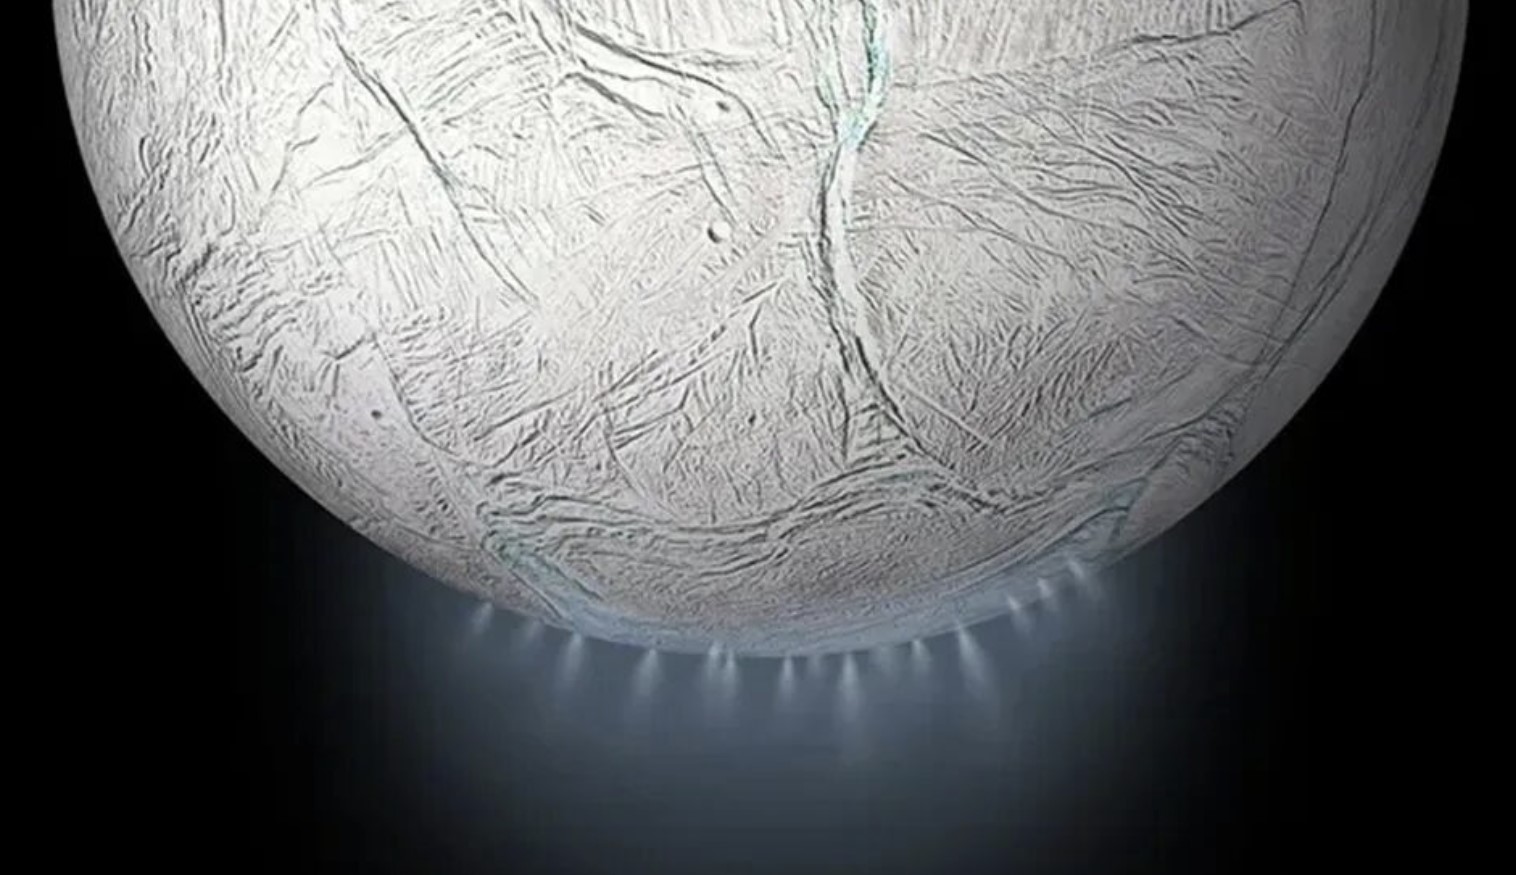 Shooting alien life to be collected from Saturn's moon Enceladus - Strange Sounds